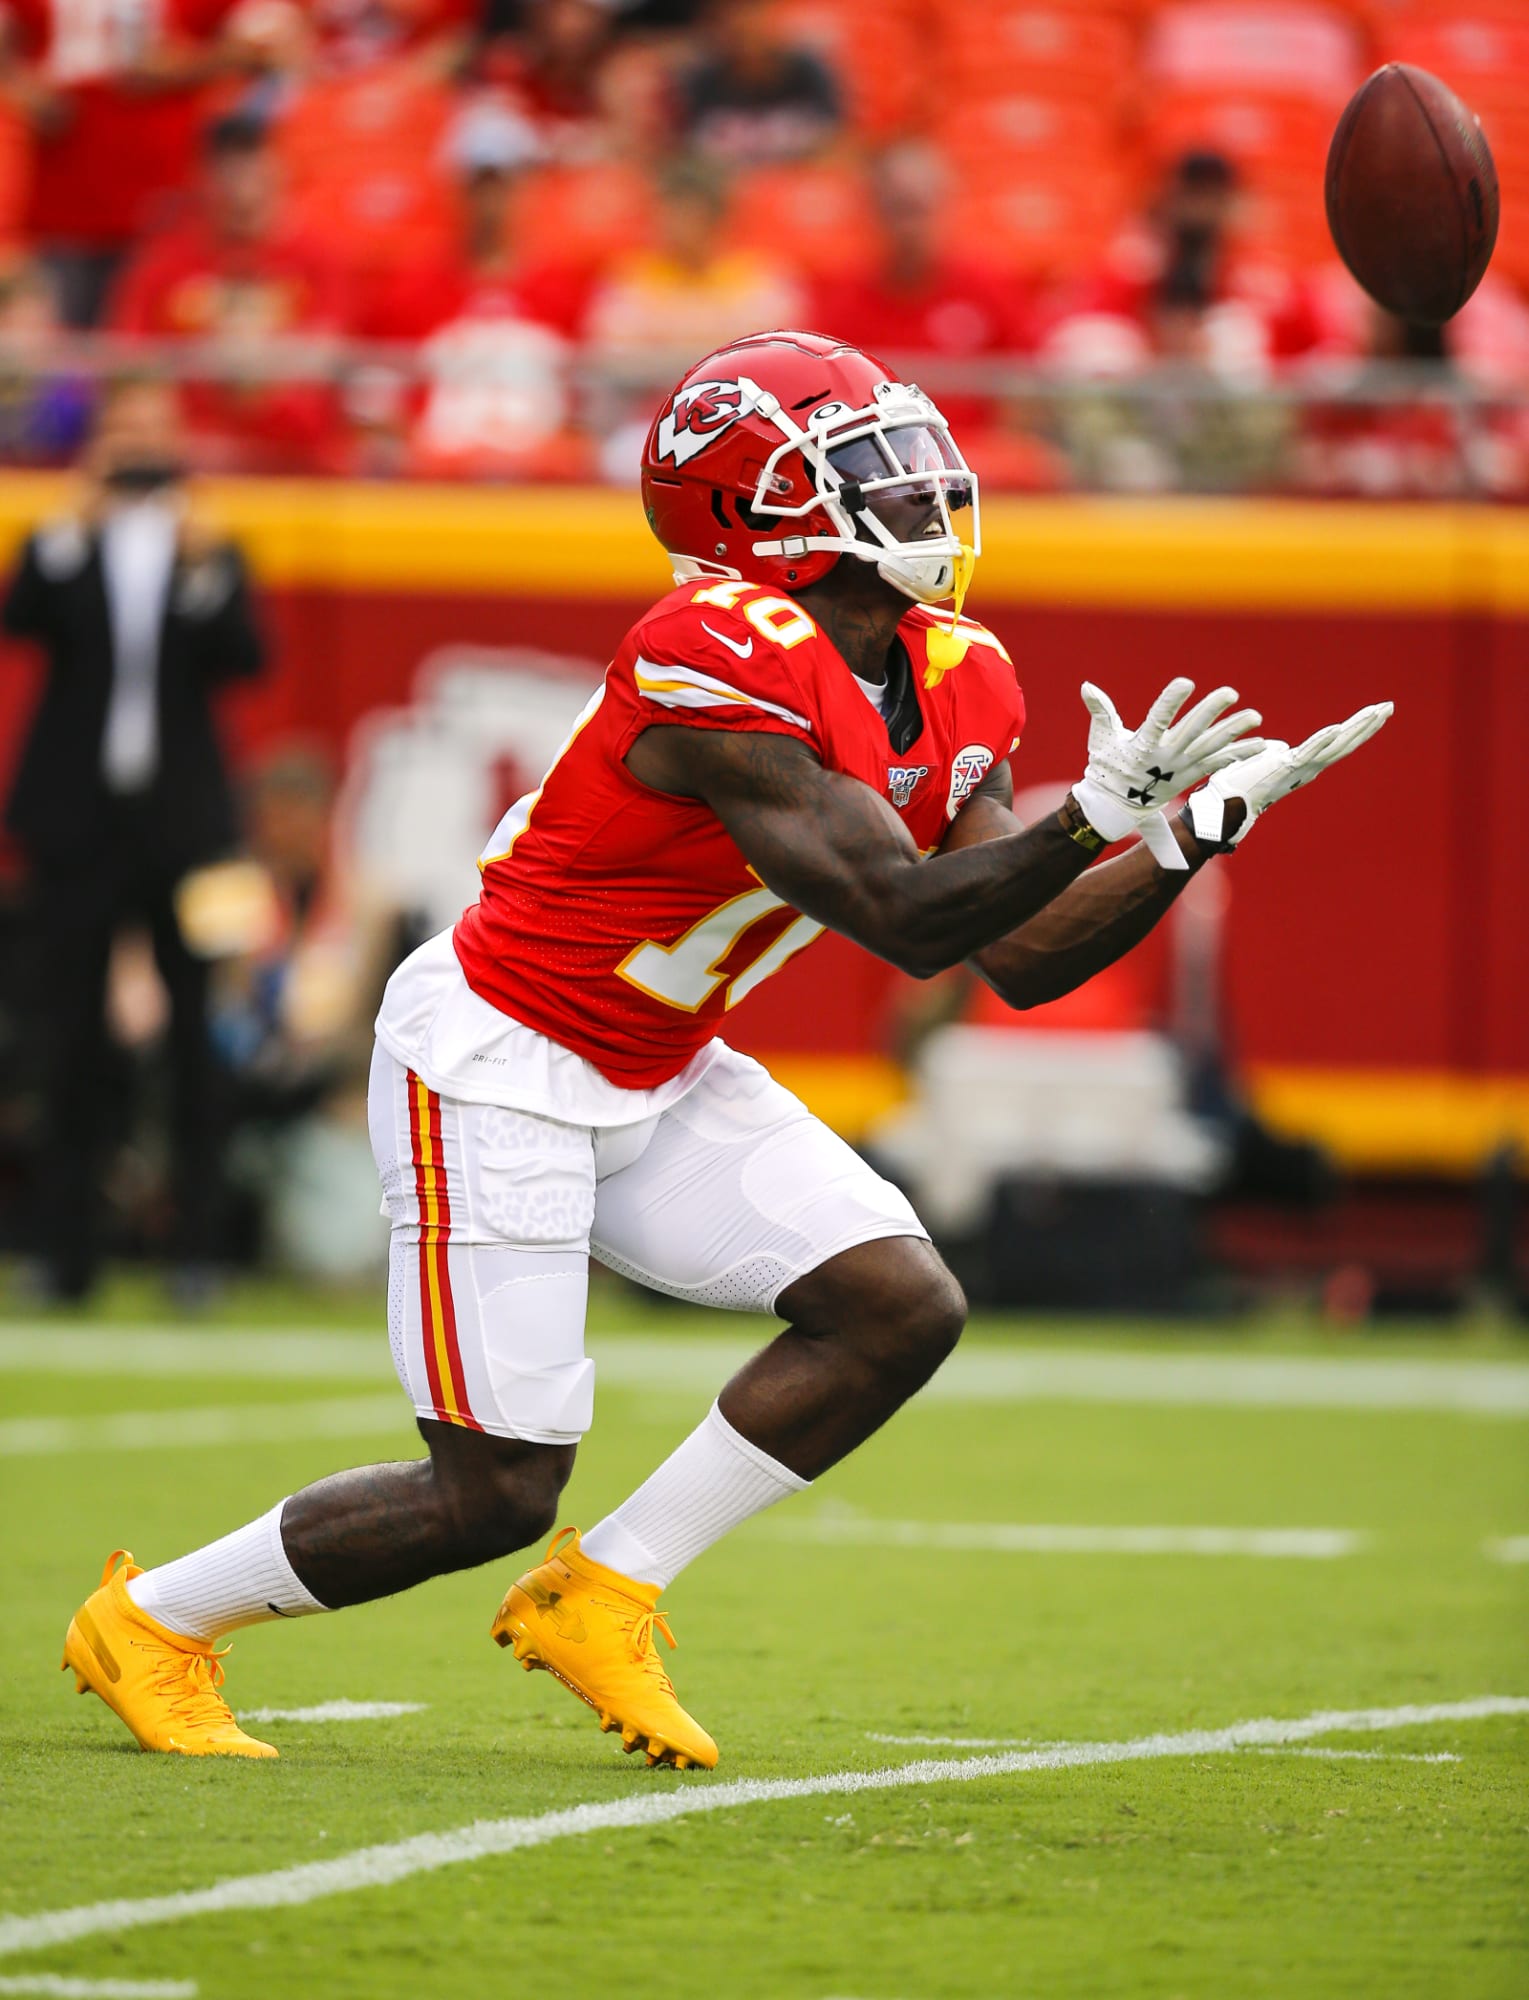 Tyreek Hill could have major fantasy football impact vs. Texans in Week 6